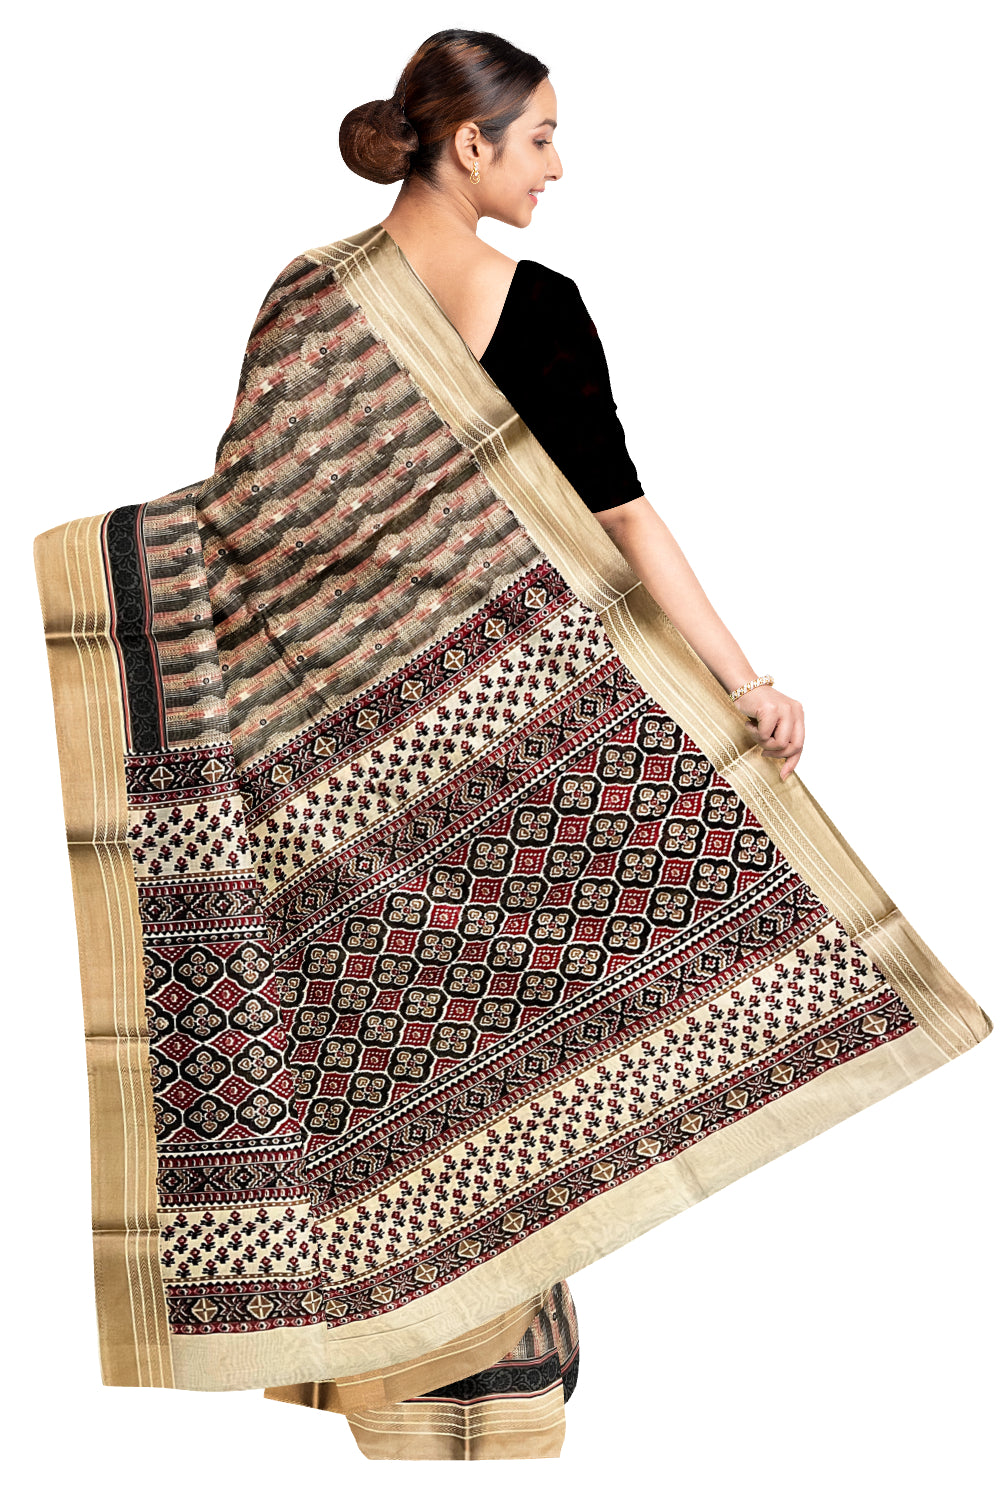 Southloom Grey Cotton Saree with Woven Patterns on Body